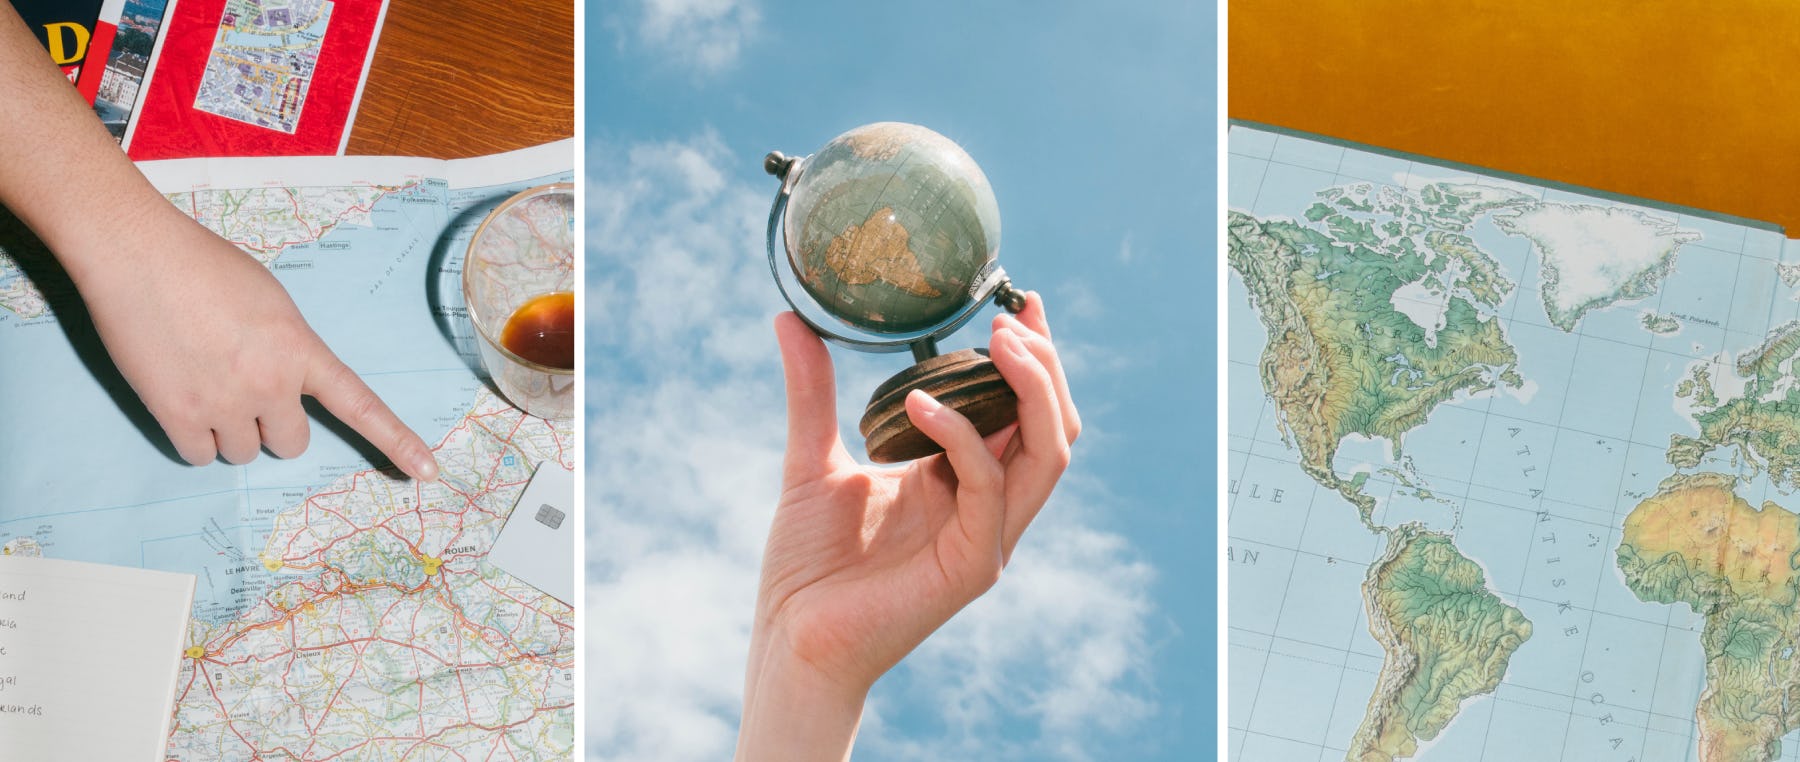 Handing pointing at a map and holding a globe.